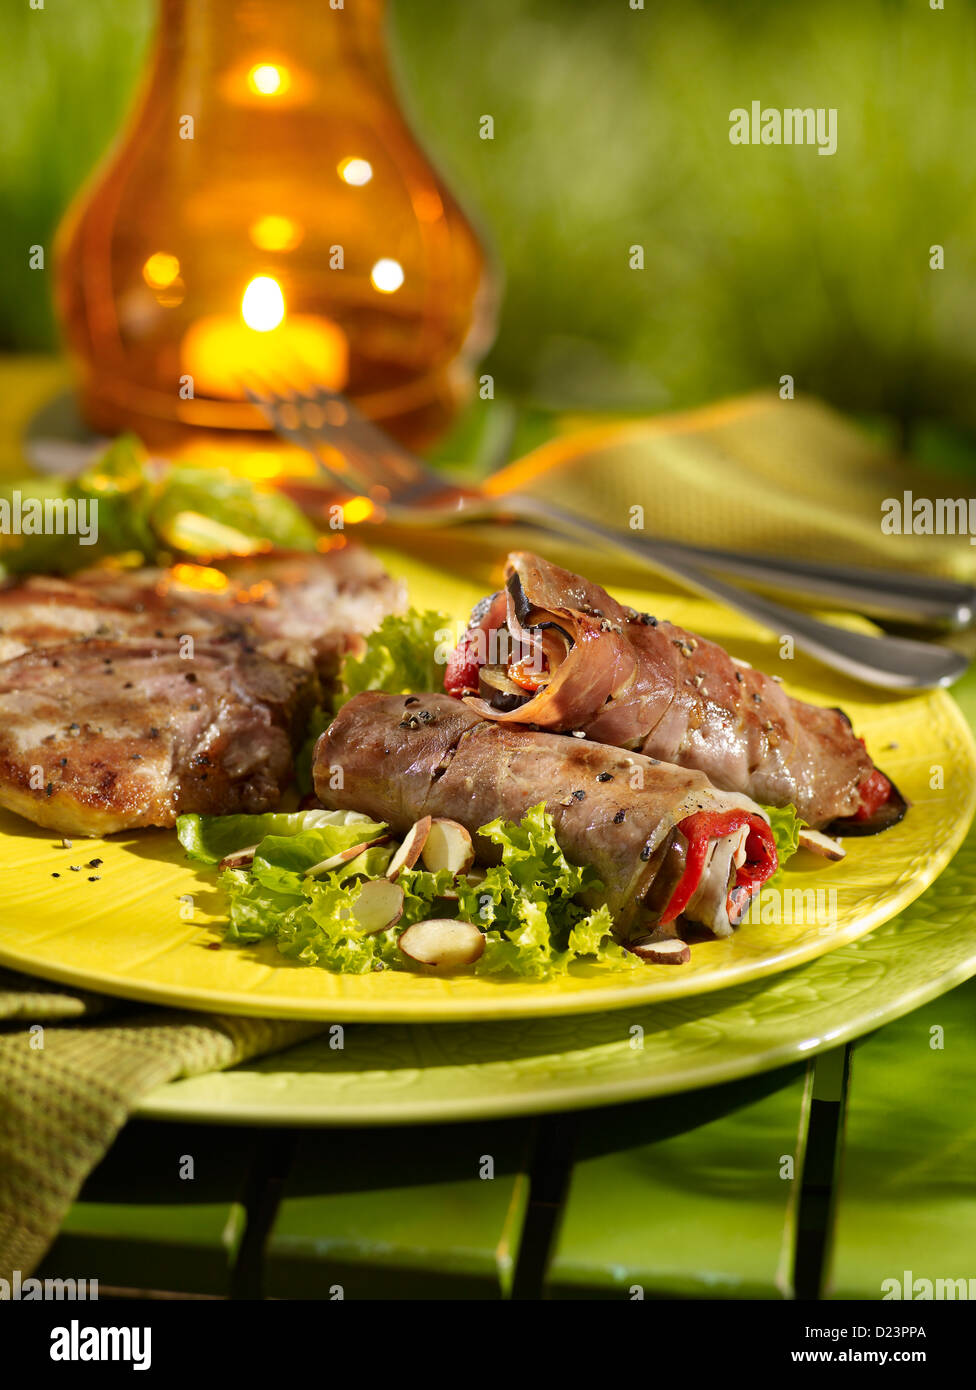 Eggplant, prosciutto and roasted red pepper involtini in an outdoor setting Stock Photo